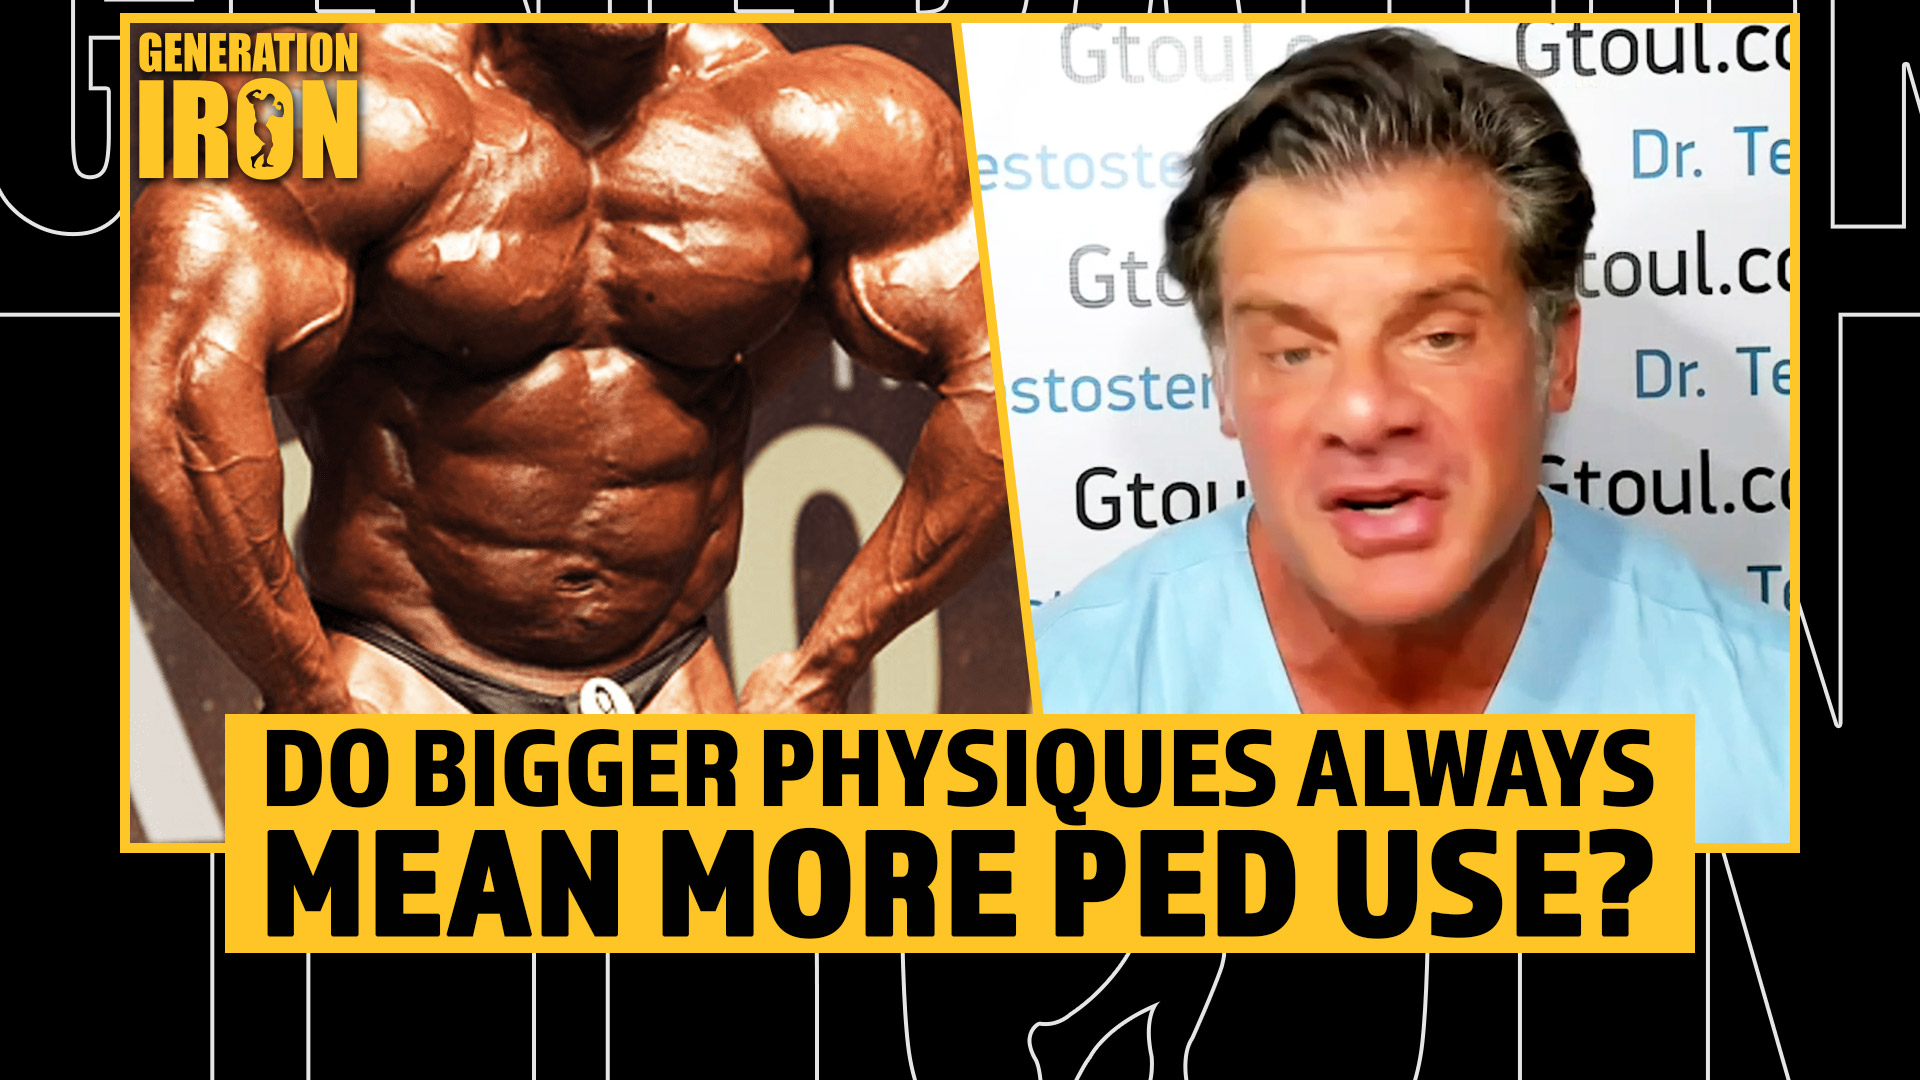 Dr. Testosterone Answers: Do Bigger Physiques Always Mean More PED Use?